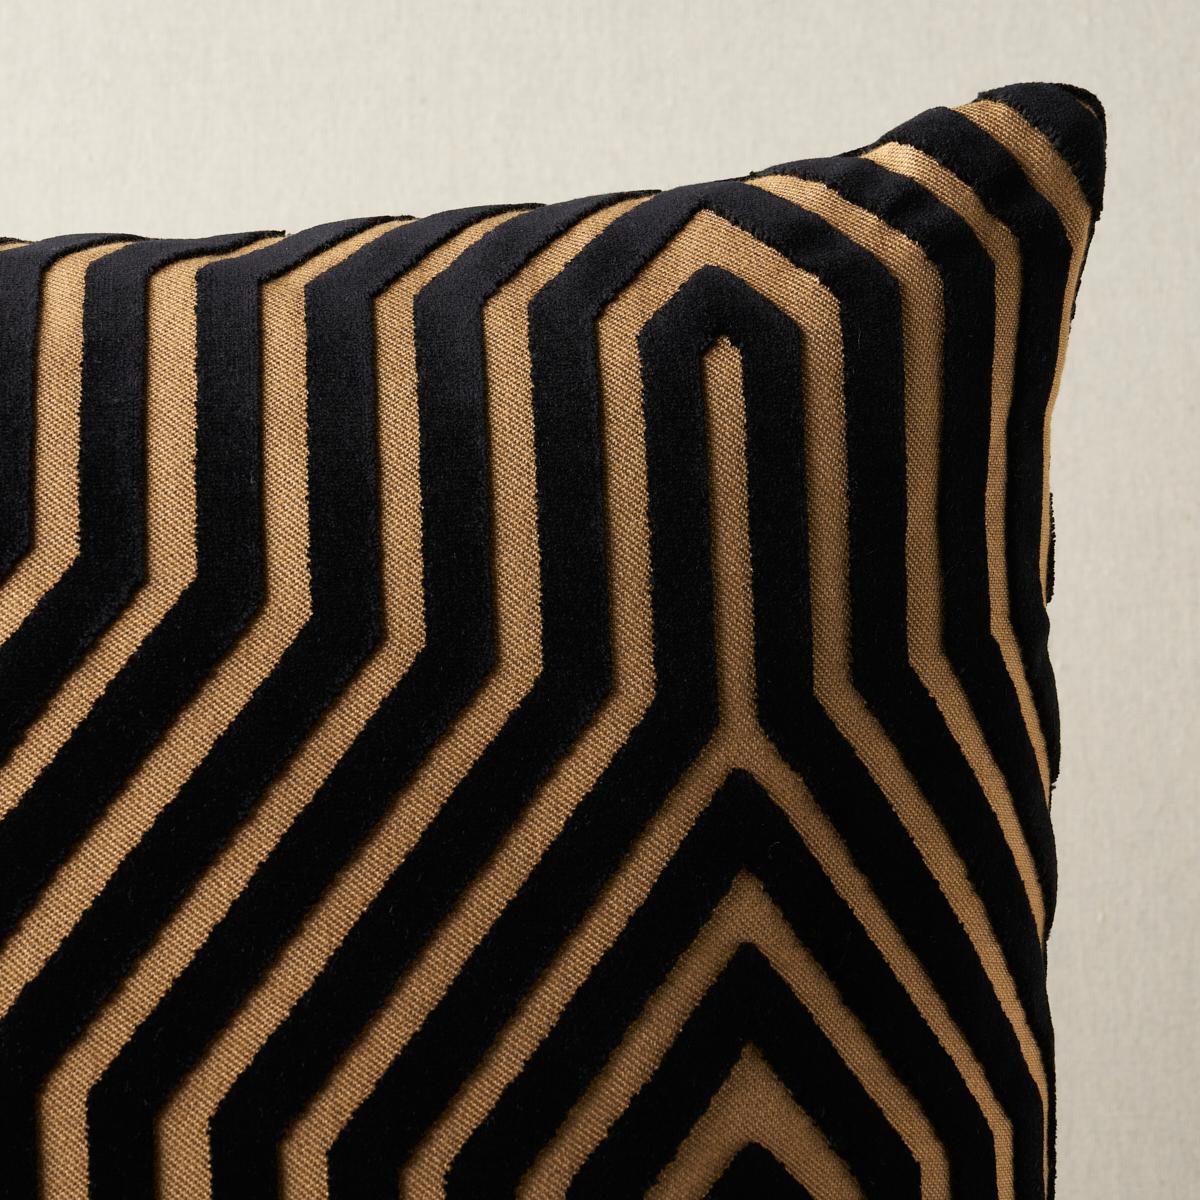 This pillow features Vanderbilt Velvet by Mary McDonald for Schumacher with a knife edge finish. A large-scale, linear design gives this Italian cut velvet fabric a graphic sensibility, while the silk-like pile adds extra dimension and a luxurious